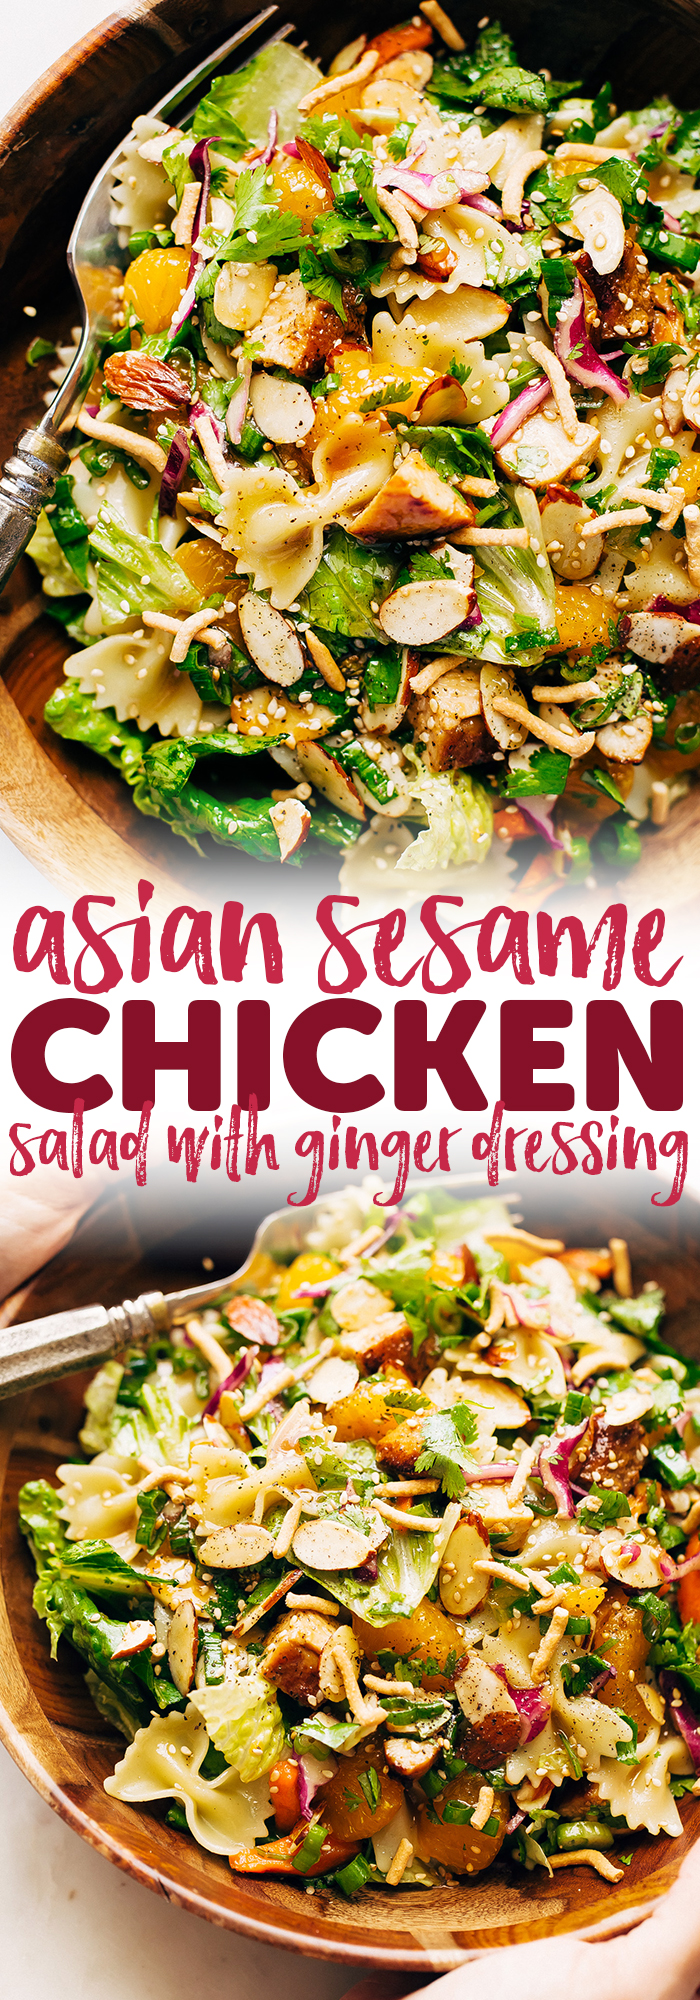 Sesame Chicken Pasta Salad with Ginger Dressing - Homemade ginger dressing drizzled all over a crunchy, filling salad! Its so good you'll want it for lunch and dinner every night this week! #salad #sesamechickensalad #asianchickensalad #chickenpastasalad | Littlespicejar.com